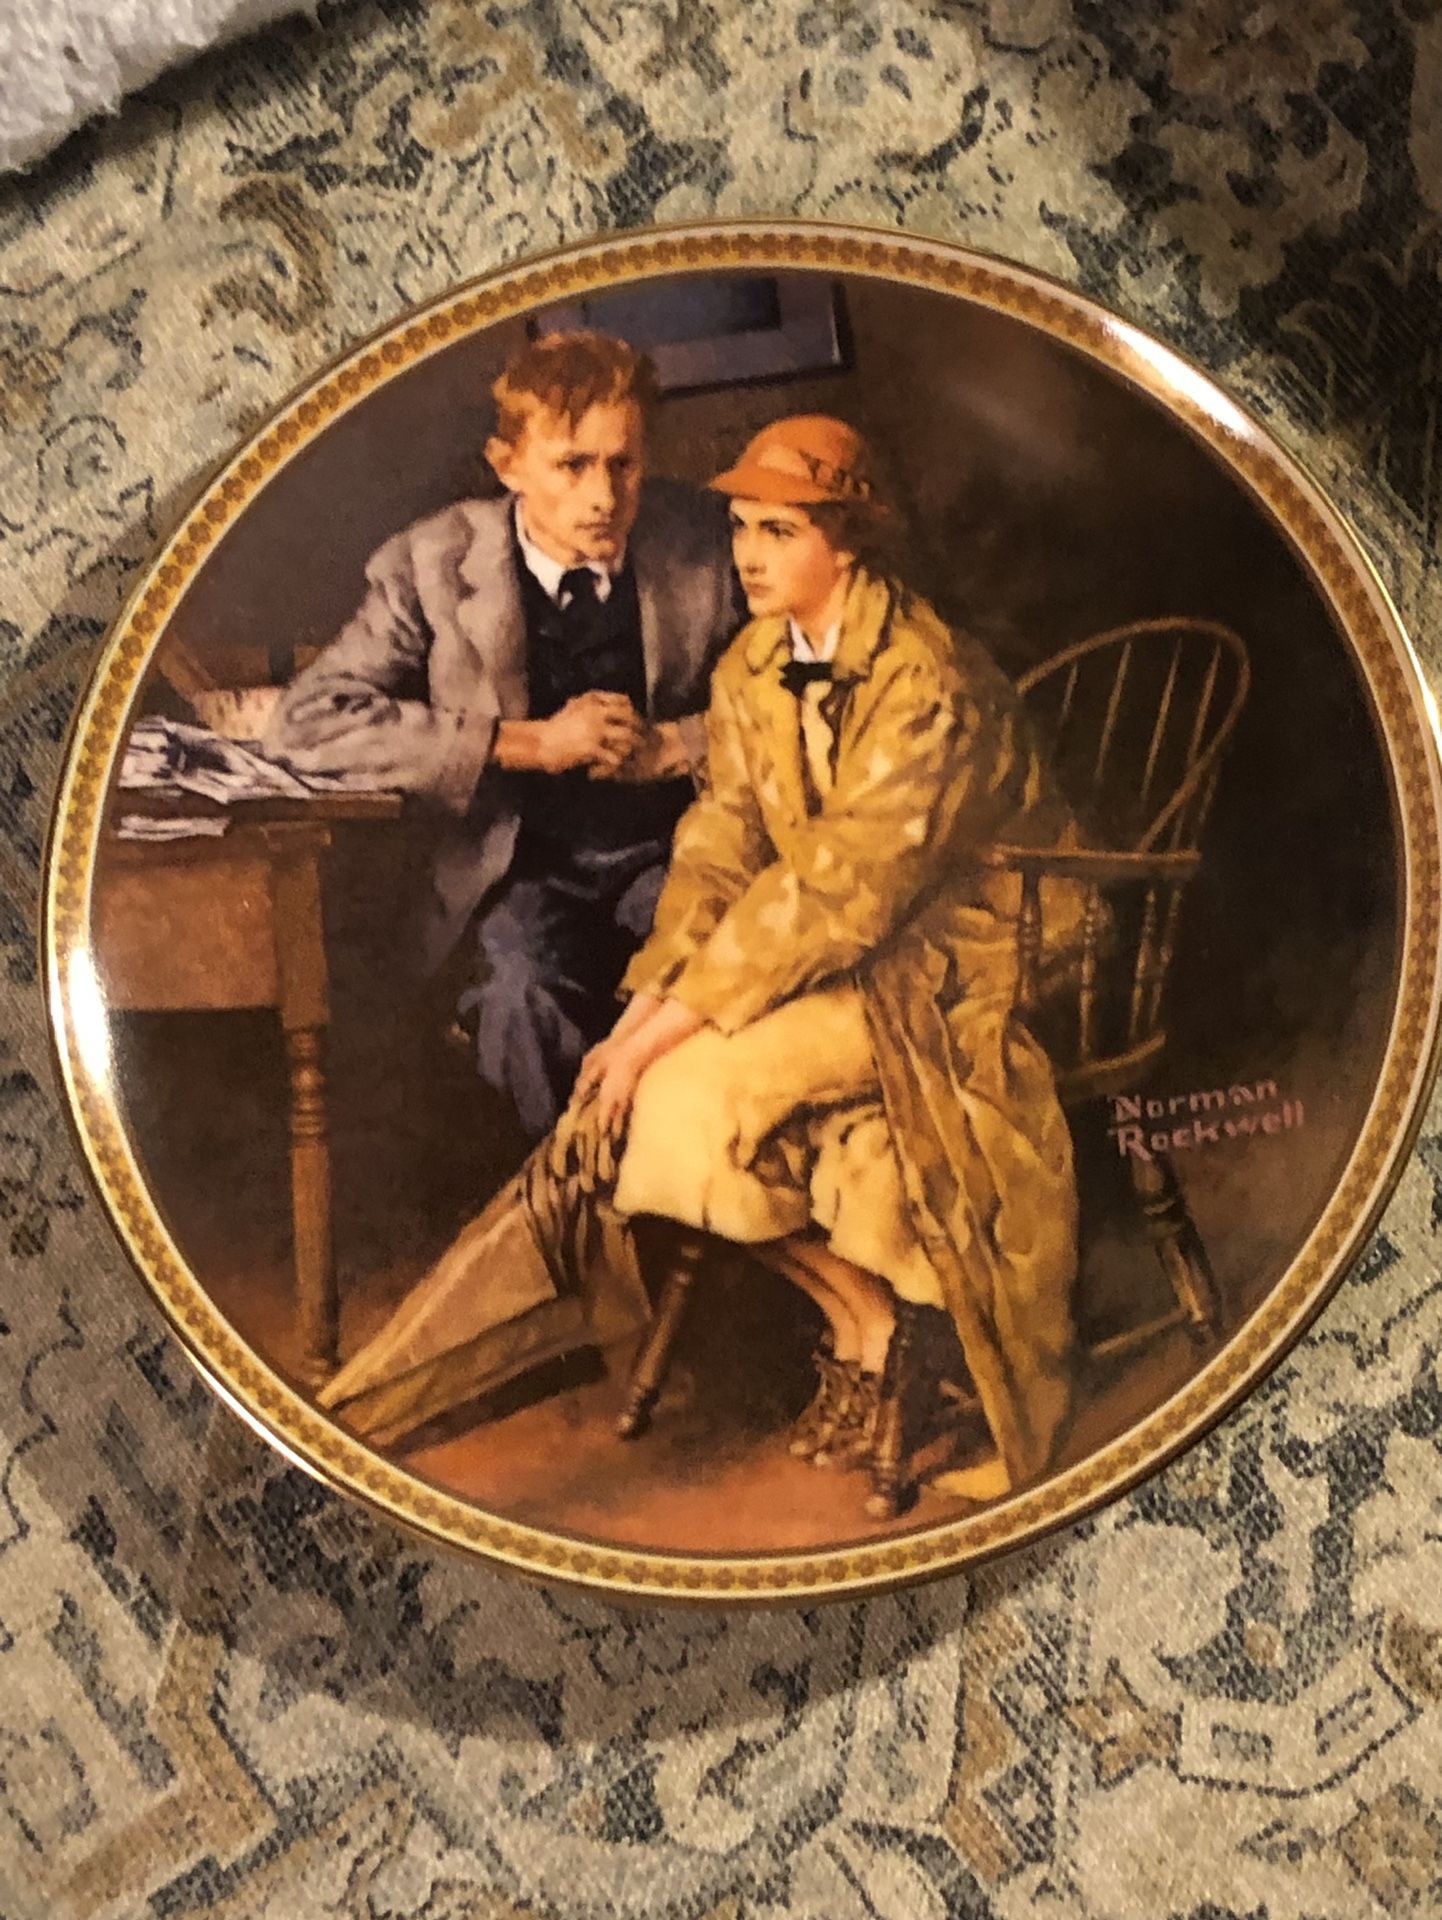 Rockwell Plates Rediscovered Women 